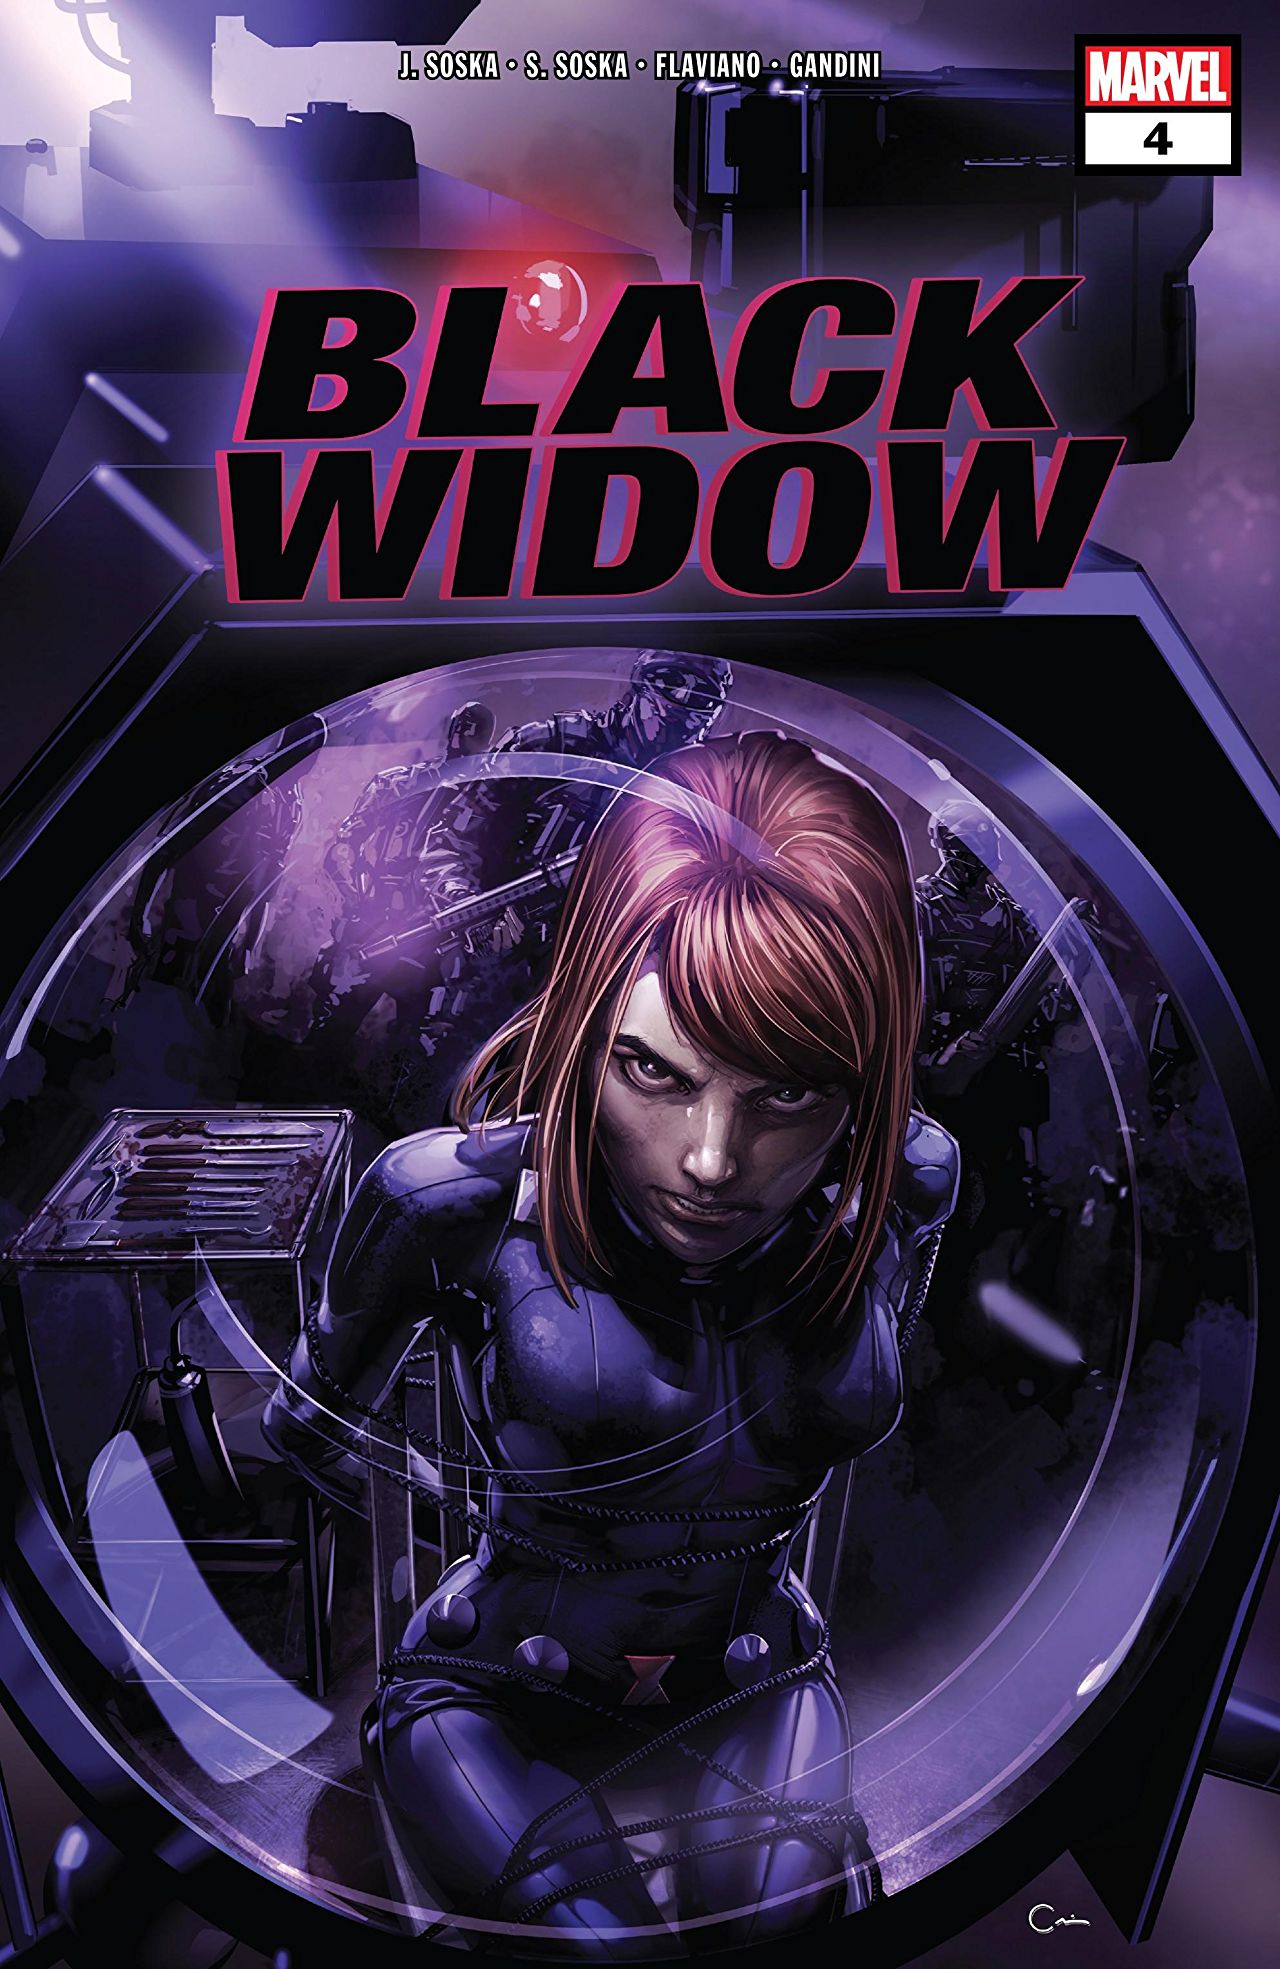 Black Widow #4 cover by Clayton Crain